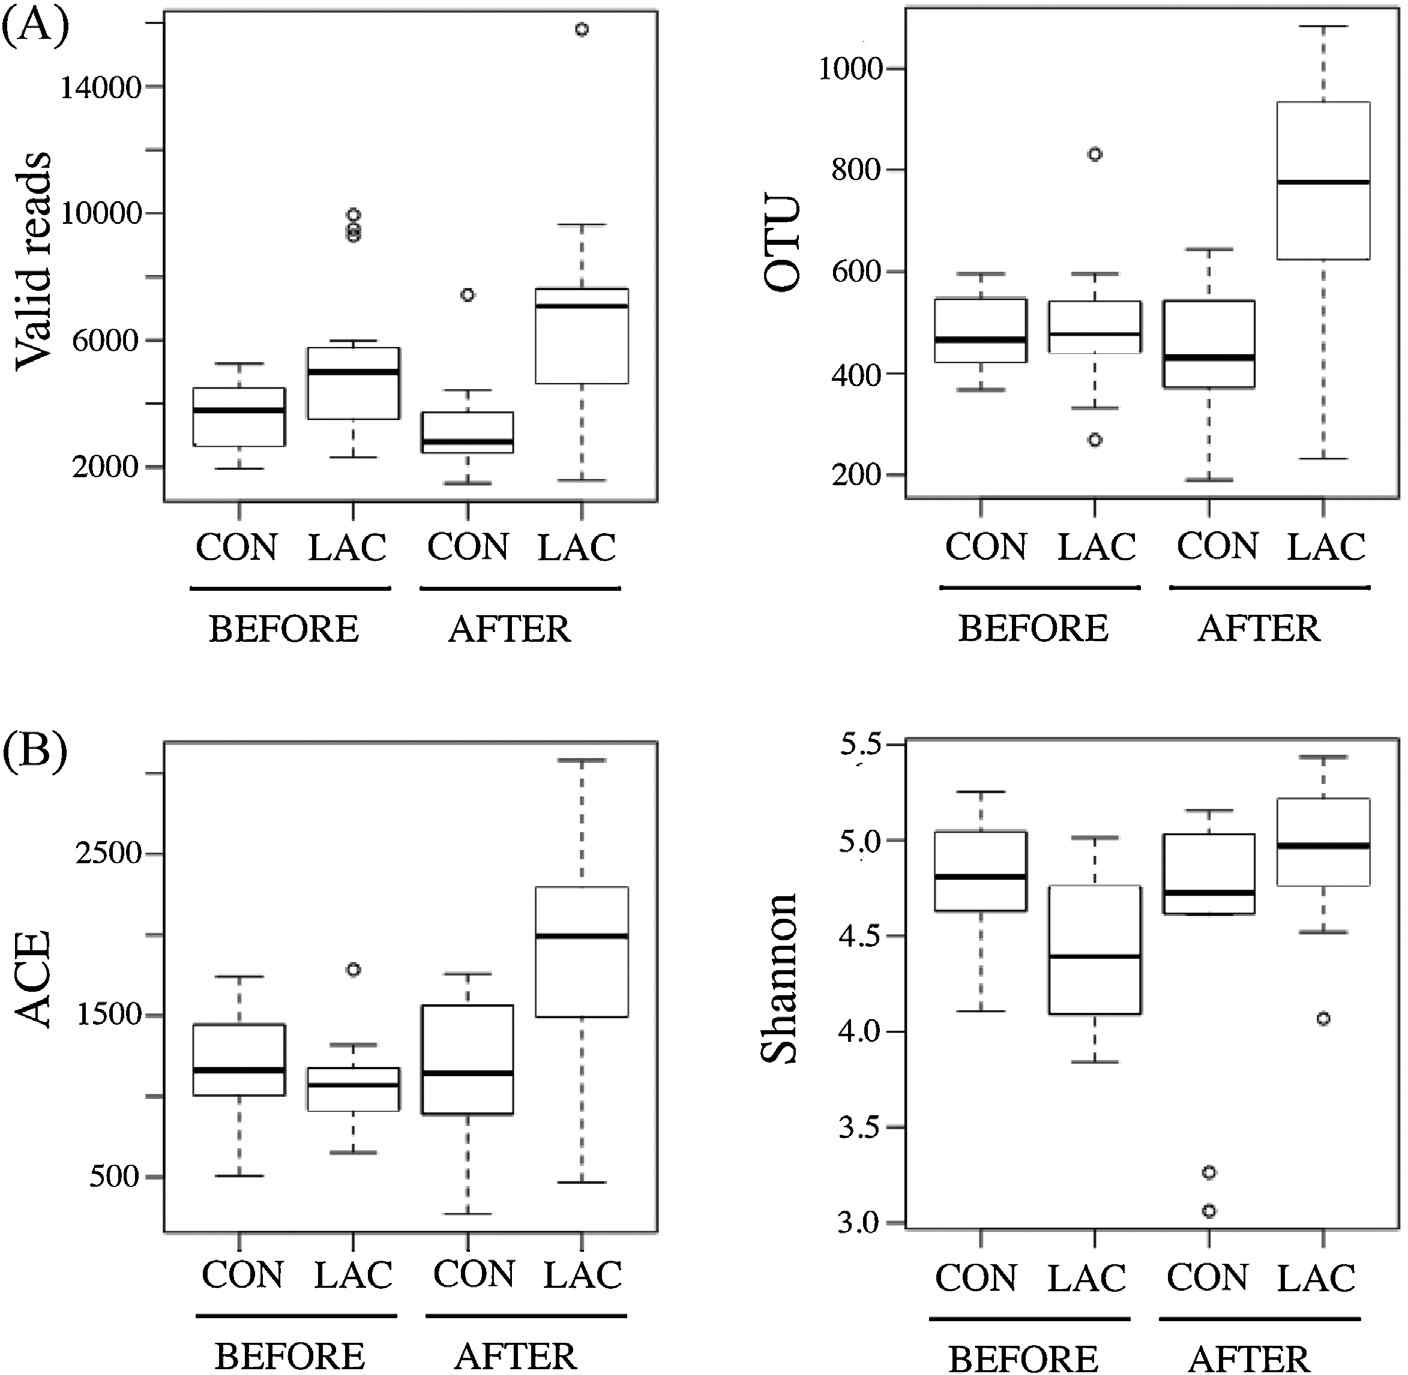 Box plot summarizing the pyrosequencing data and microbial diversity among pig groups. Pig groups are depicted as CON = control/basal diet andLAC = basal diet with lactulose. (A) Valid reads and operational taxonomic units (OTU at >97% identity threshold) and (B) abundance-based coverage estimate(ACE) and Shannon diversity estimate are presented. The interquartile range is represented by the outer bounds of the boxes, the median is represented bythe midline (black), and the outliers are represented by the white circles (). The whiskers represent the minimum and maximum values. Kruskal-Wallissignificance tests showed significant differences between CON and LAC groups before and after treatment (PValid reads= 0.001 and POTU= 0.006) and microbialdiversity and richness (PShannon= 0.004 and PACE= 0.01)